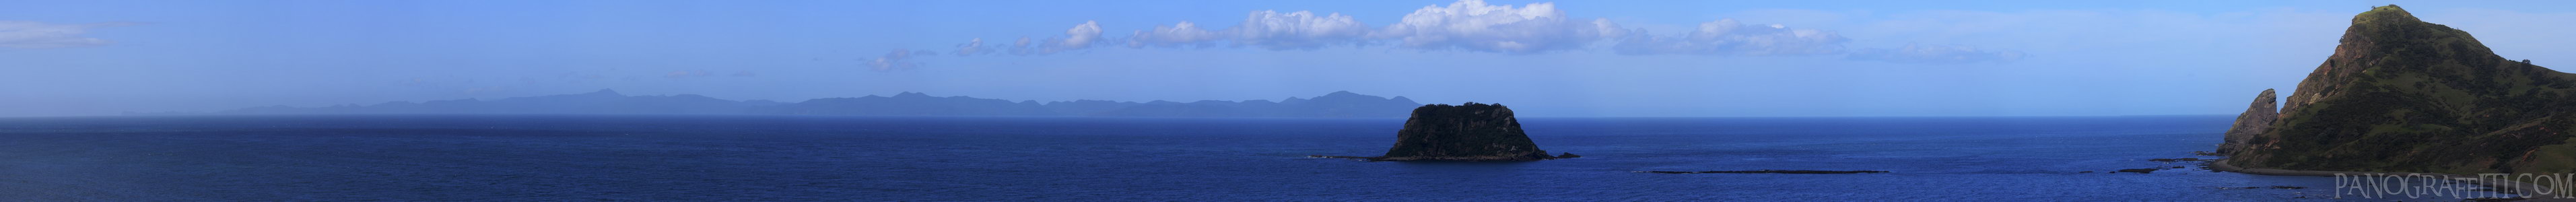 Great Barrier Island From Fletchers Bay - View of Great Barrier Island in the distance